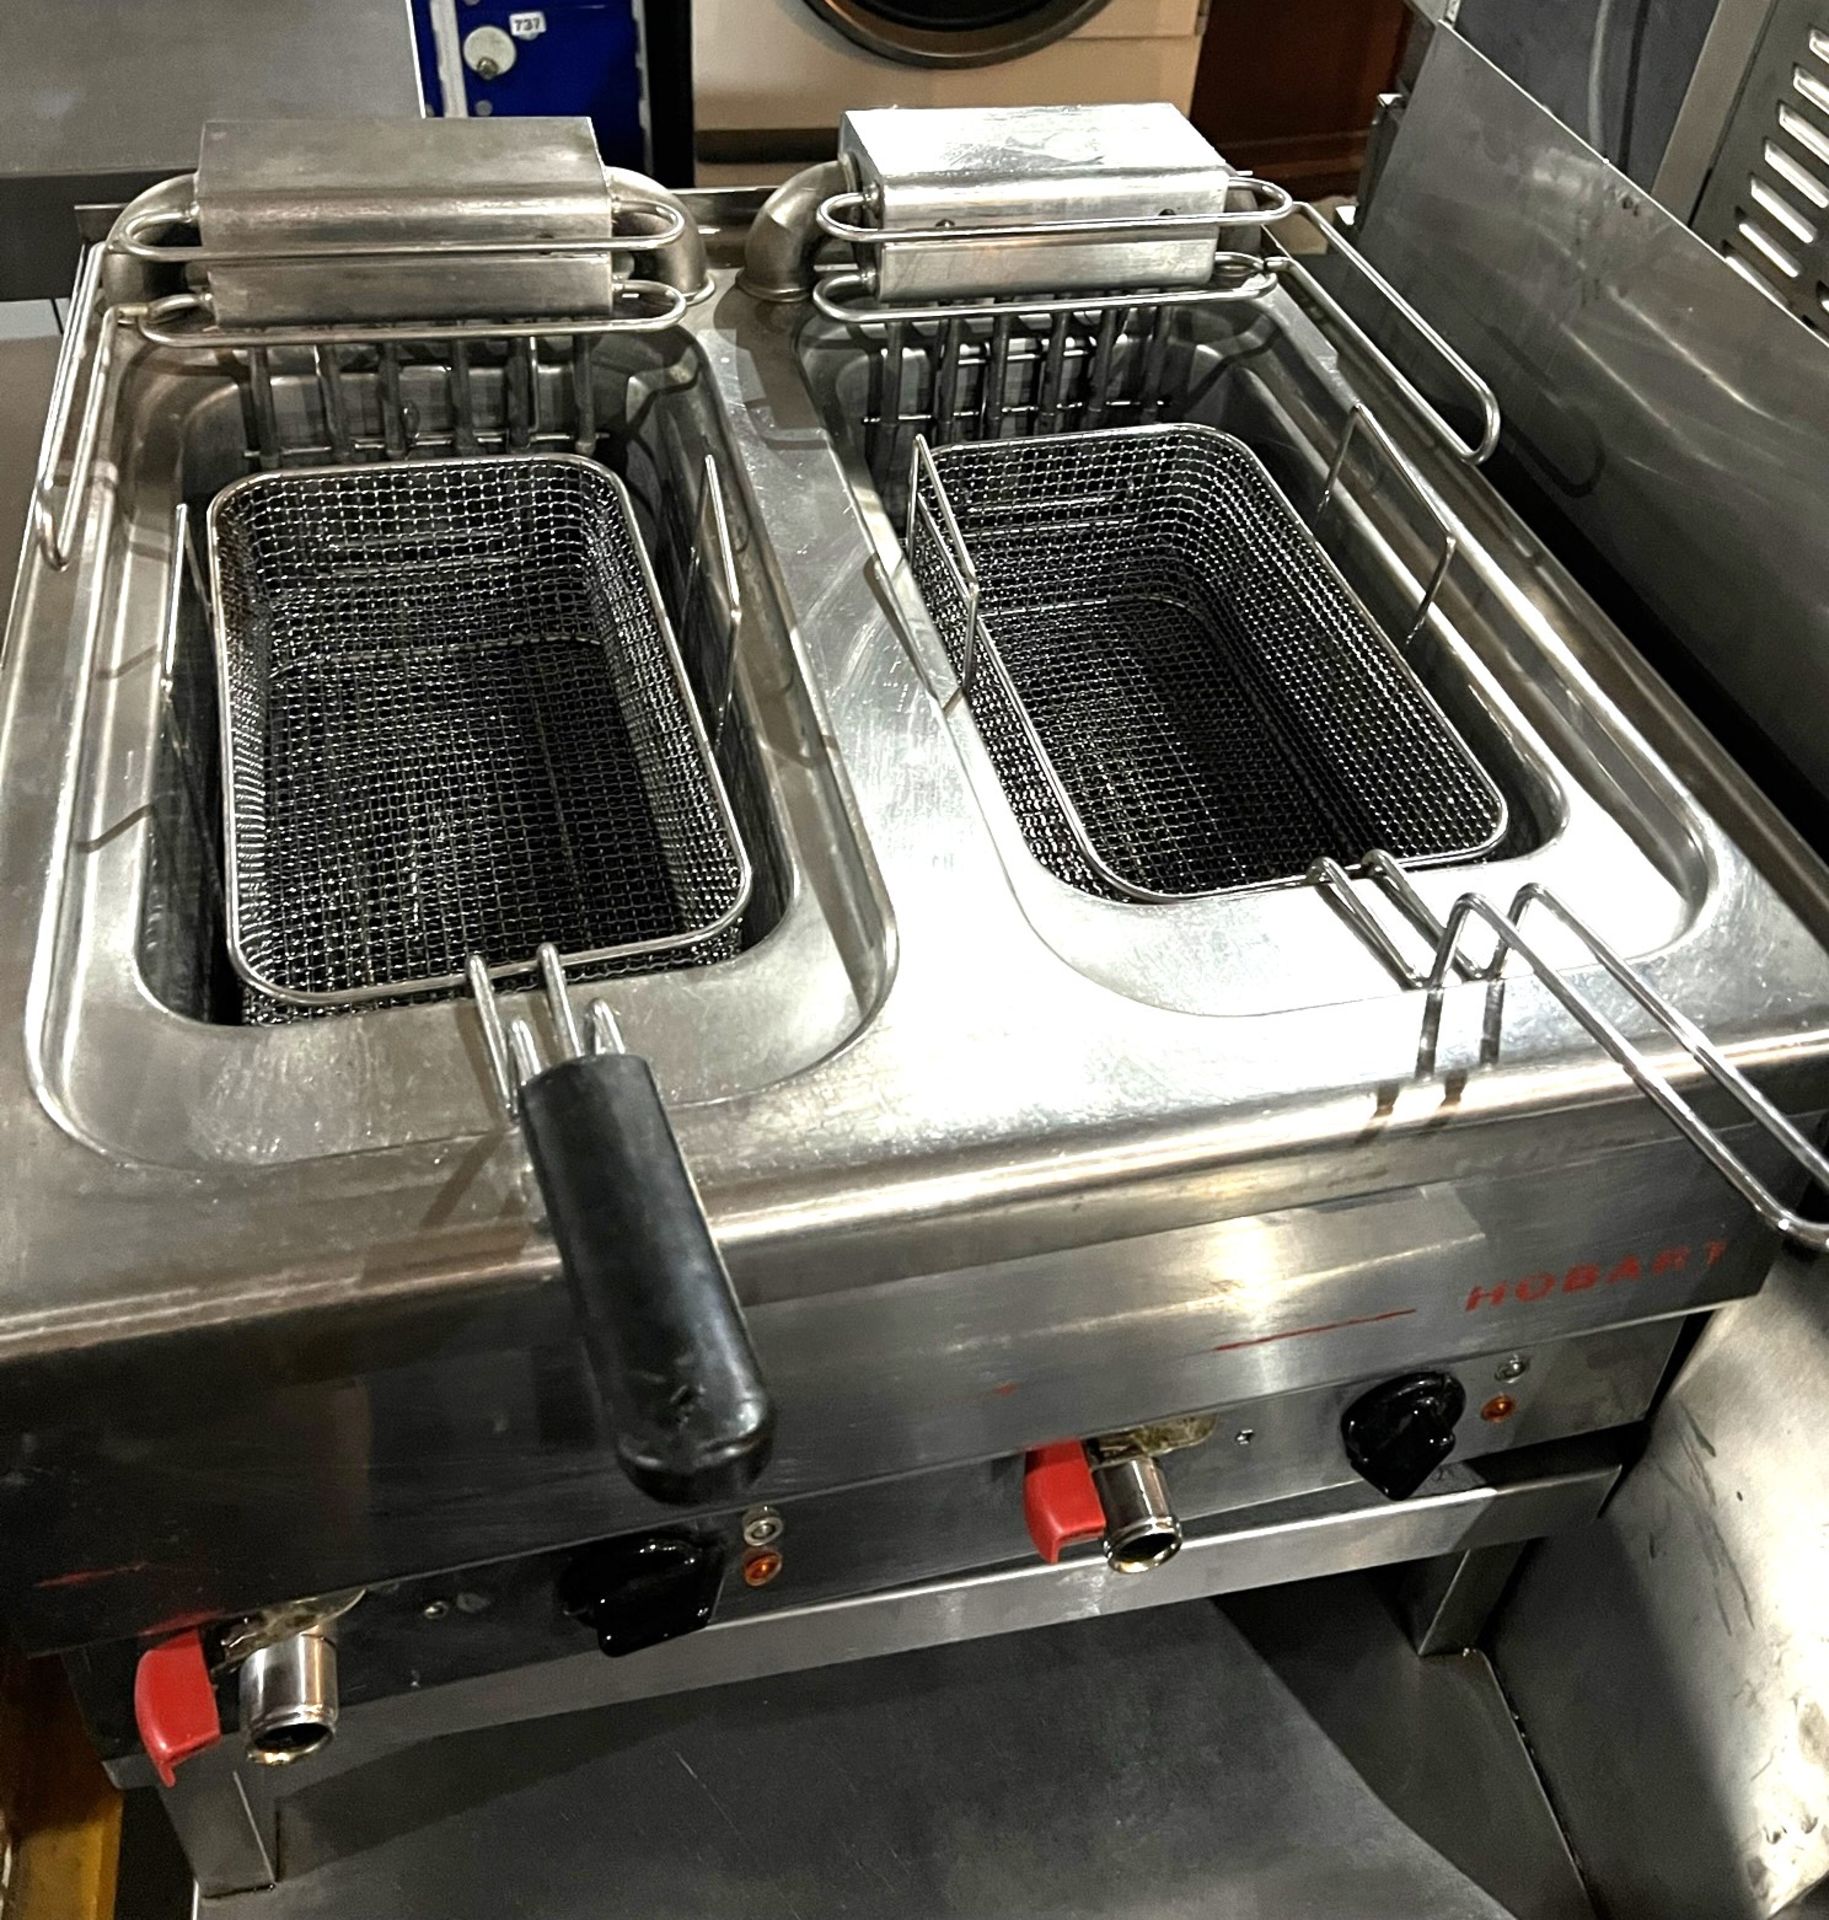 Hobart Twin Basket 3 Phase electric Fryer, Tabletop 600mm wide - Image 2 of 3